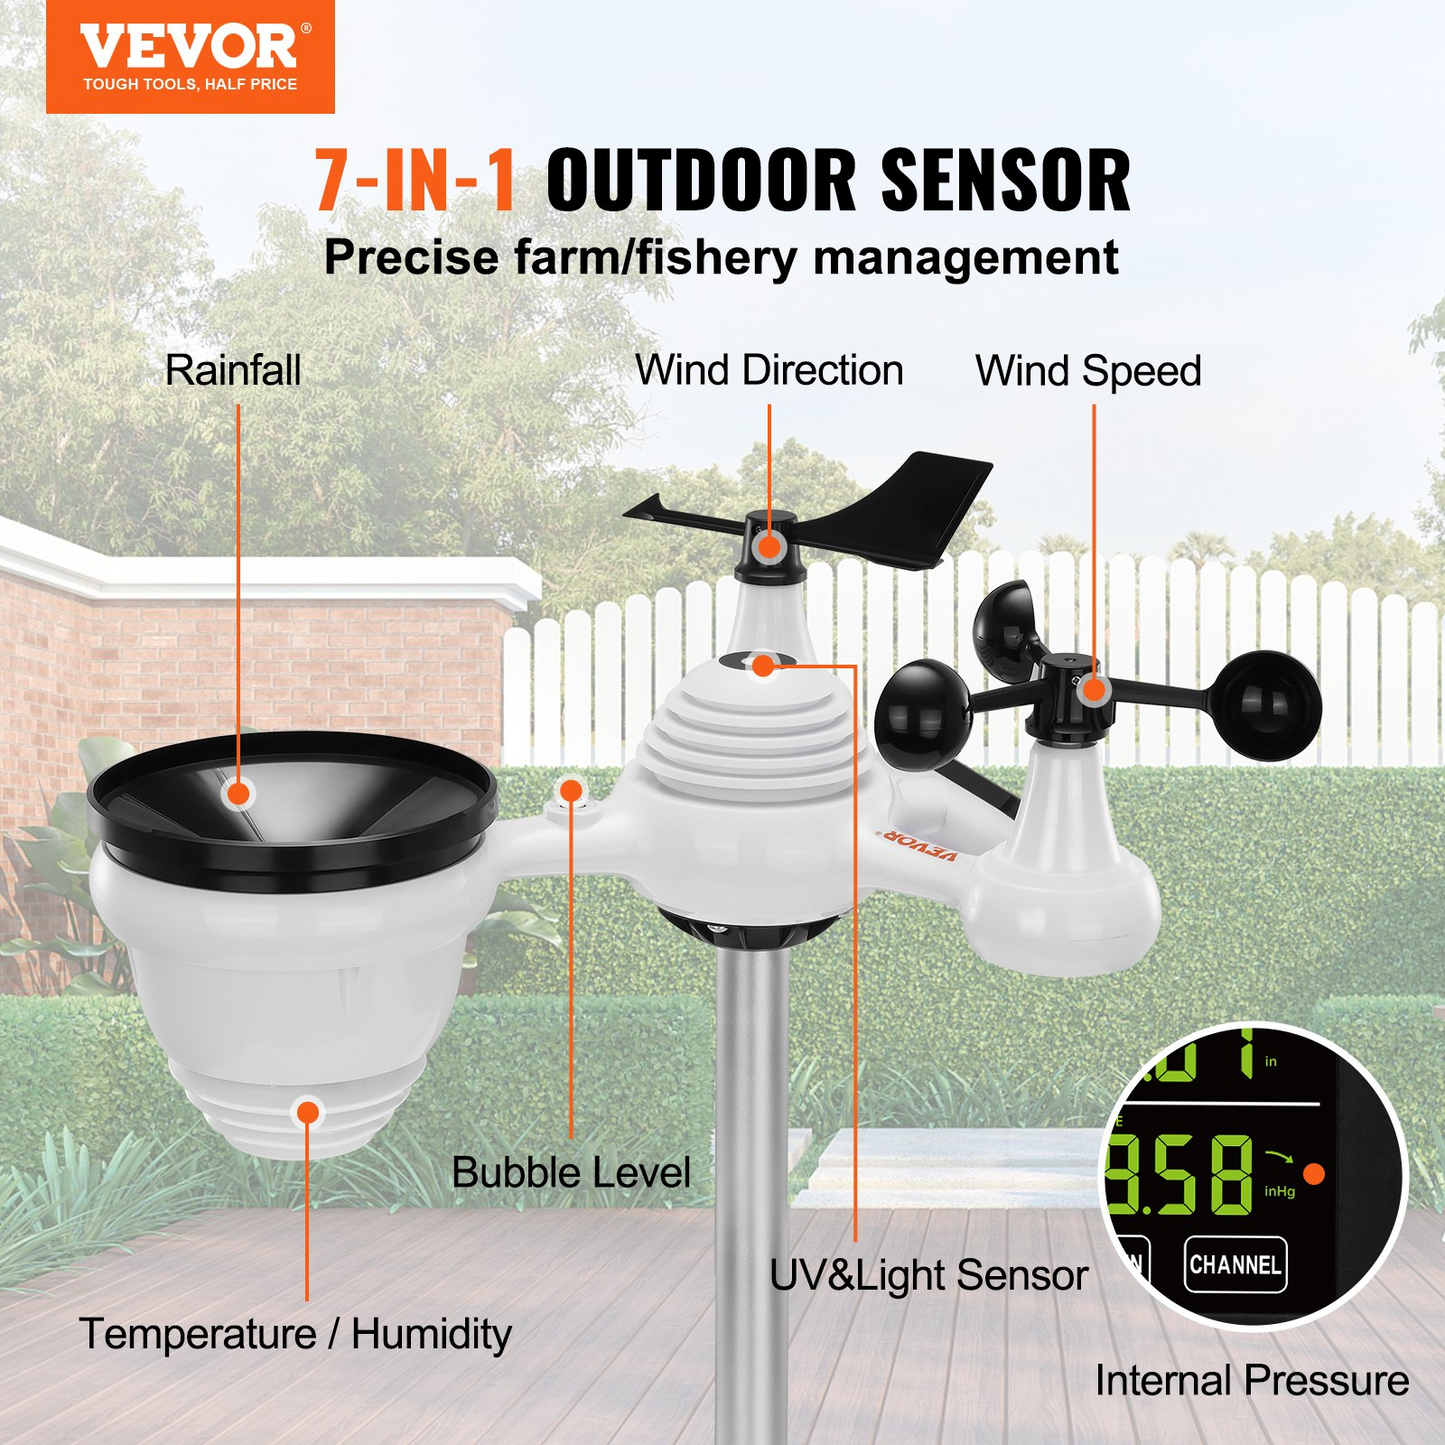 VEVOR 7-in-1 Wireless Weather Station, 7.5 in Large Color Display, Digital Home Weather Station Indoor Outdoor, for Temperature Humidity Wind Speed/Direction Rain UV, with Forecast Data, Alarm, Alerts